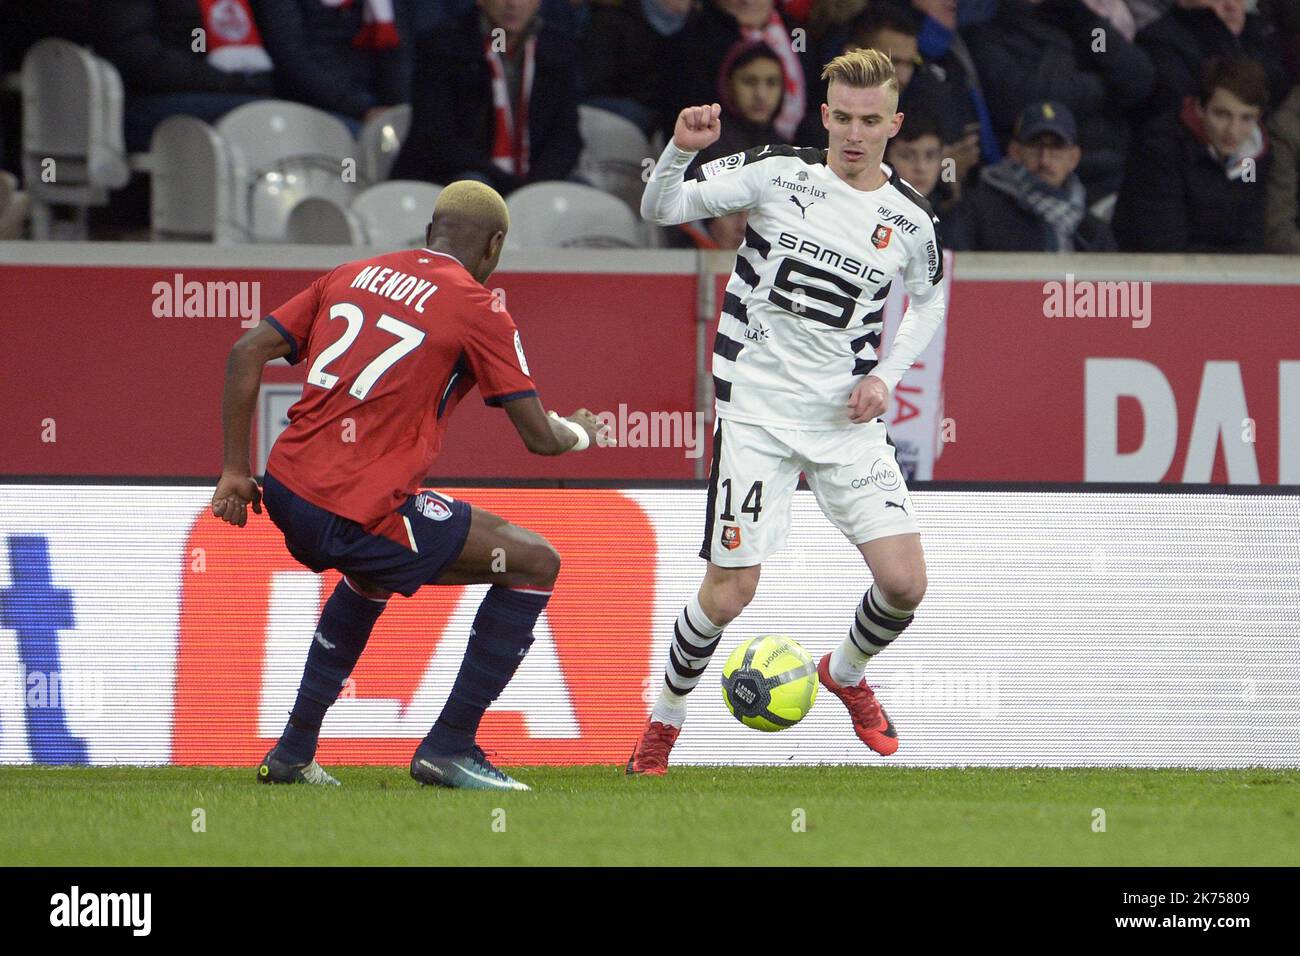 Benjamin Bourigeaud . 14 . Hamza Mendyl . 27 . during the Lille OSC v Stade Rennais Ligue 1 match at the Stade Pierre-Mauroy, Lille Stock Photo